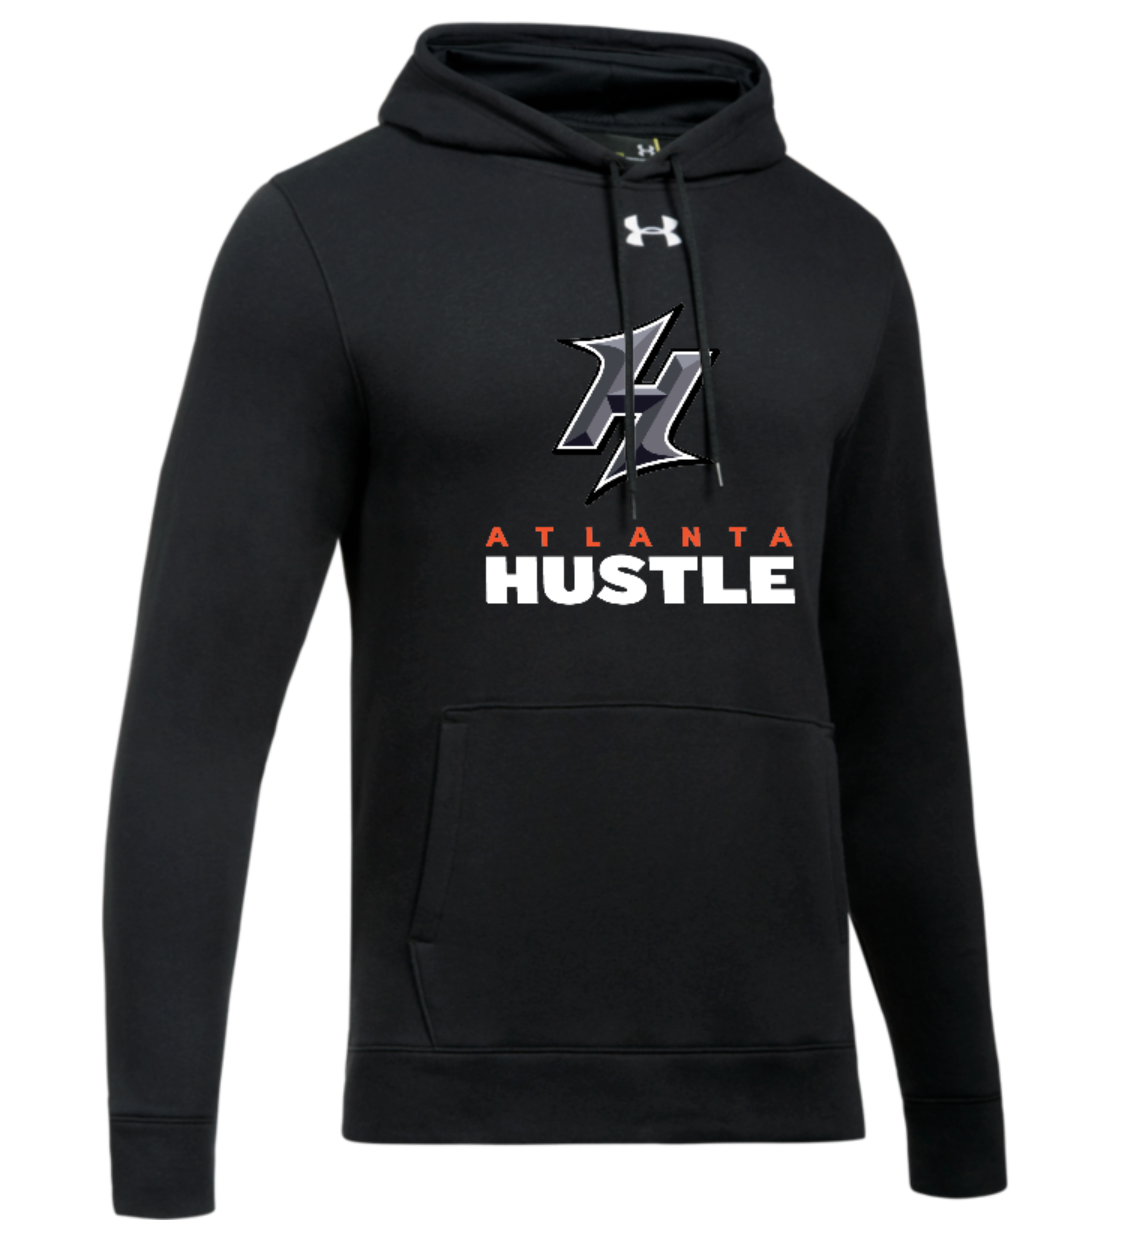 Under Armour Hustle Fleece Jogging Pants Navy Heather/White 1317455-411 -  Free Shipping at LASC